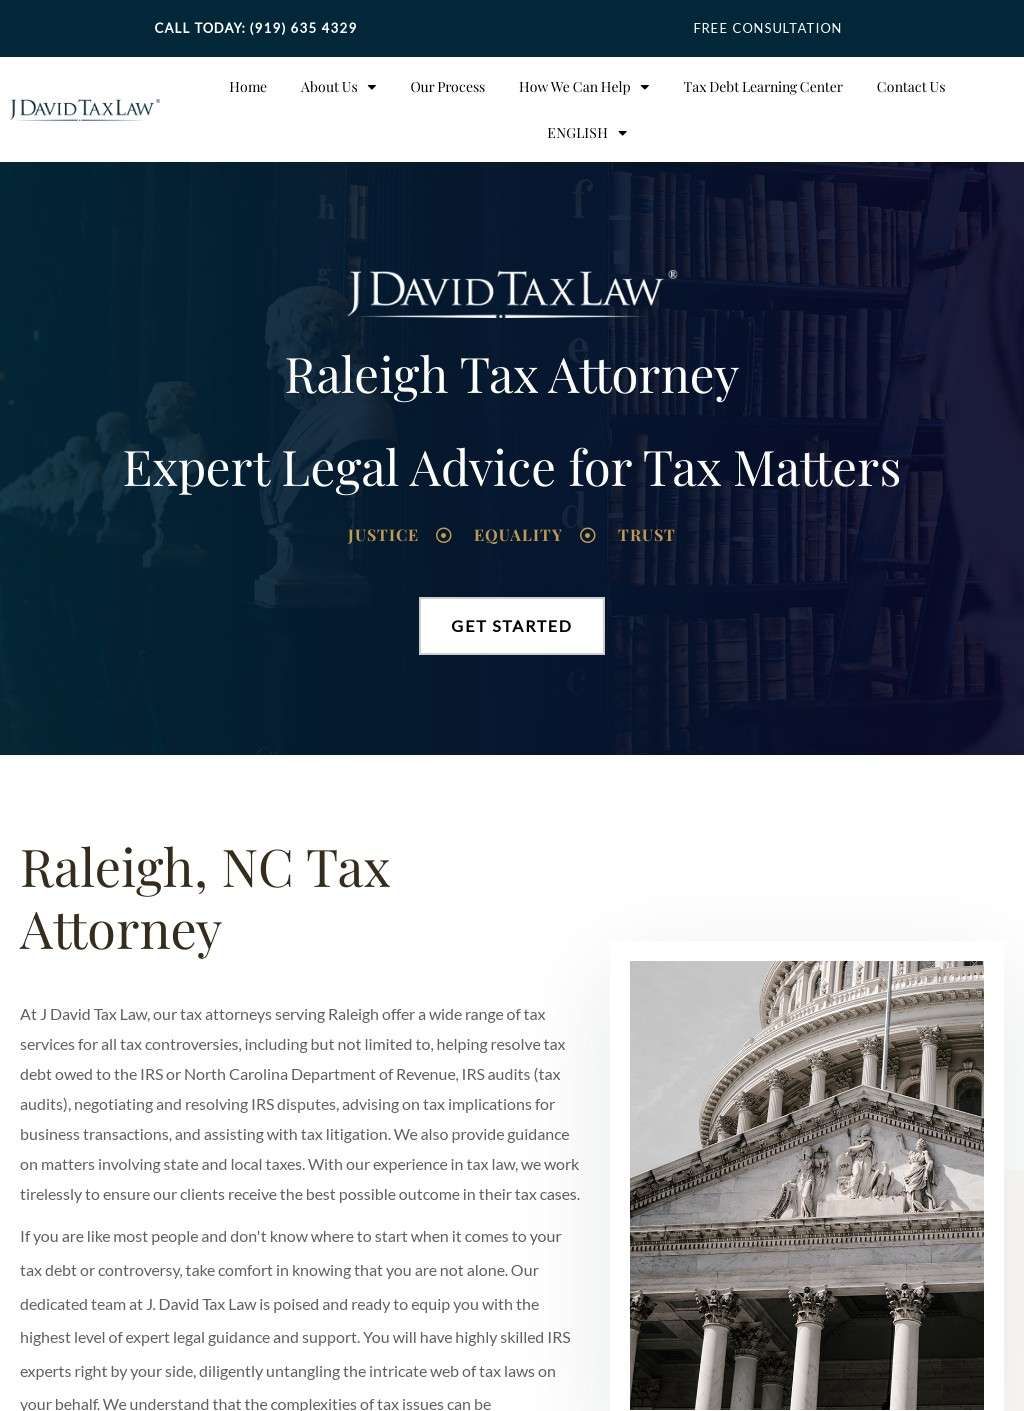 Attorney For Tax Debt In Raleigh, North Carolina